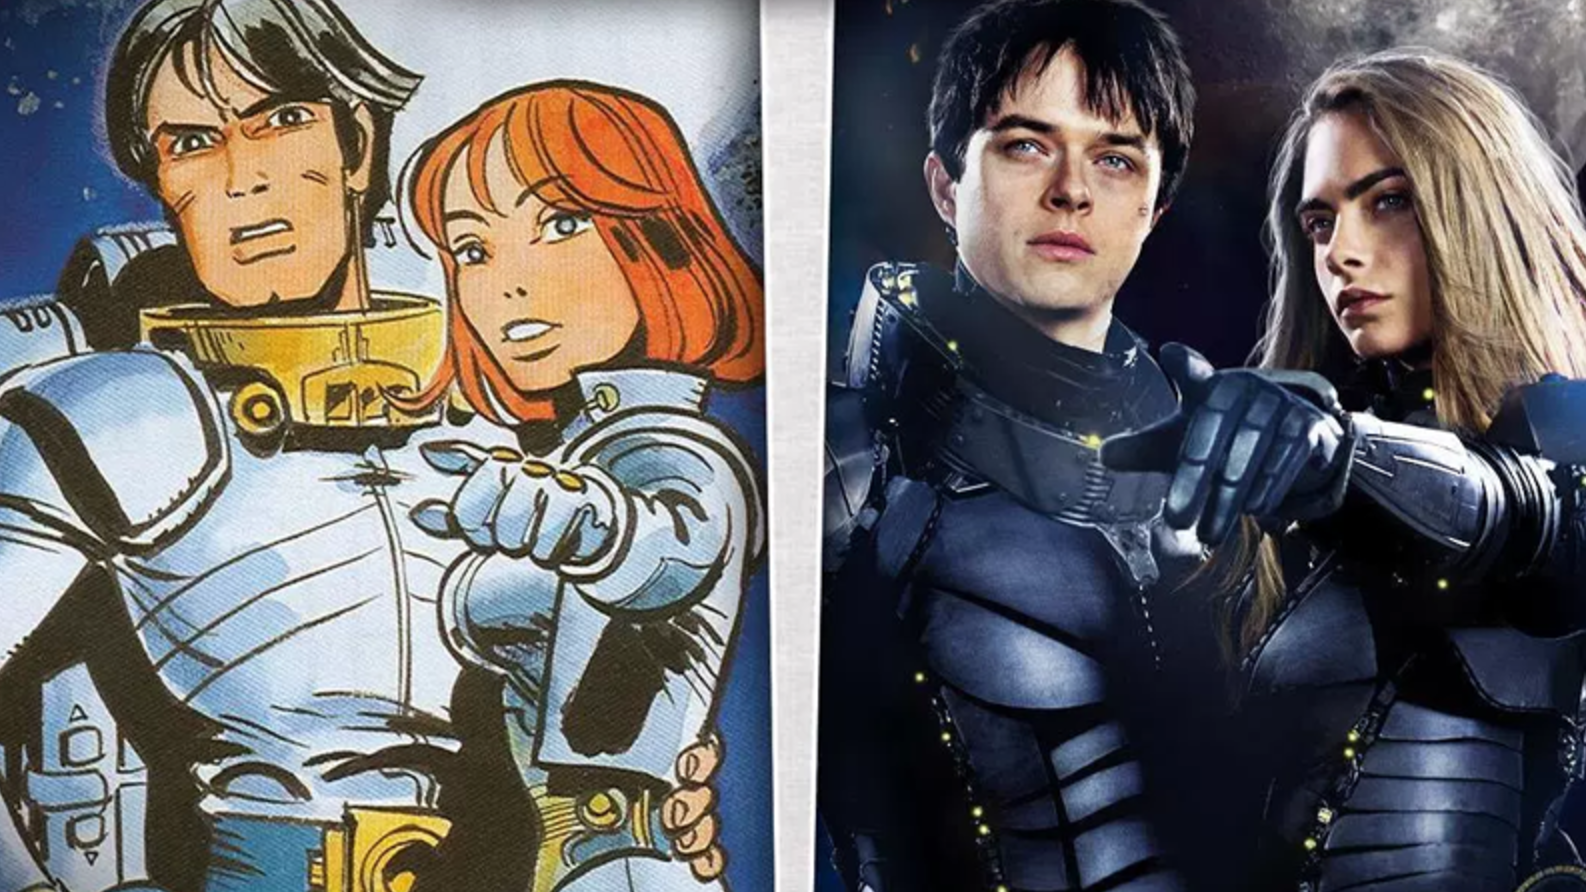 Valerian and Laureline: The Comic that Inspired the Valerian Movie